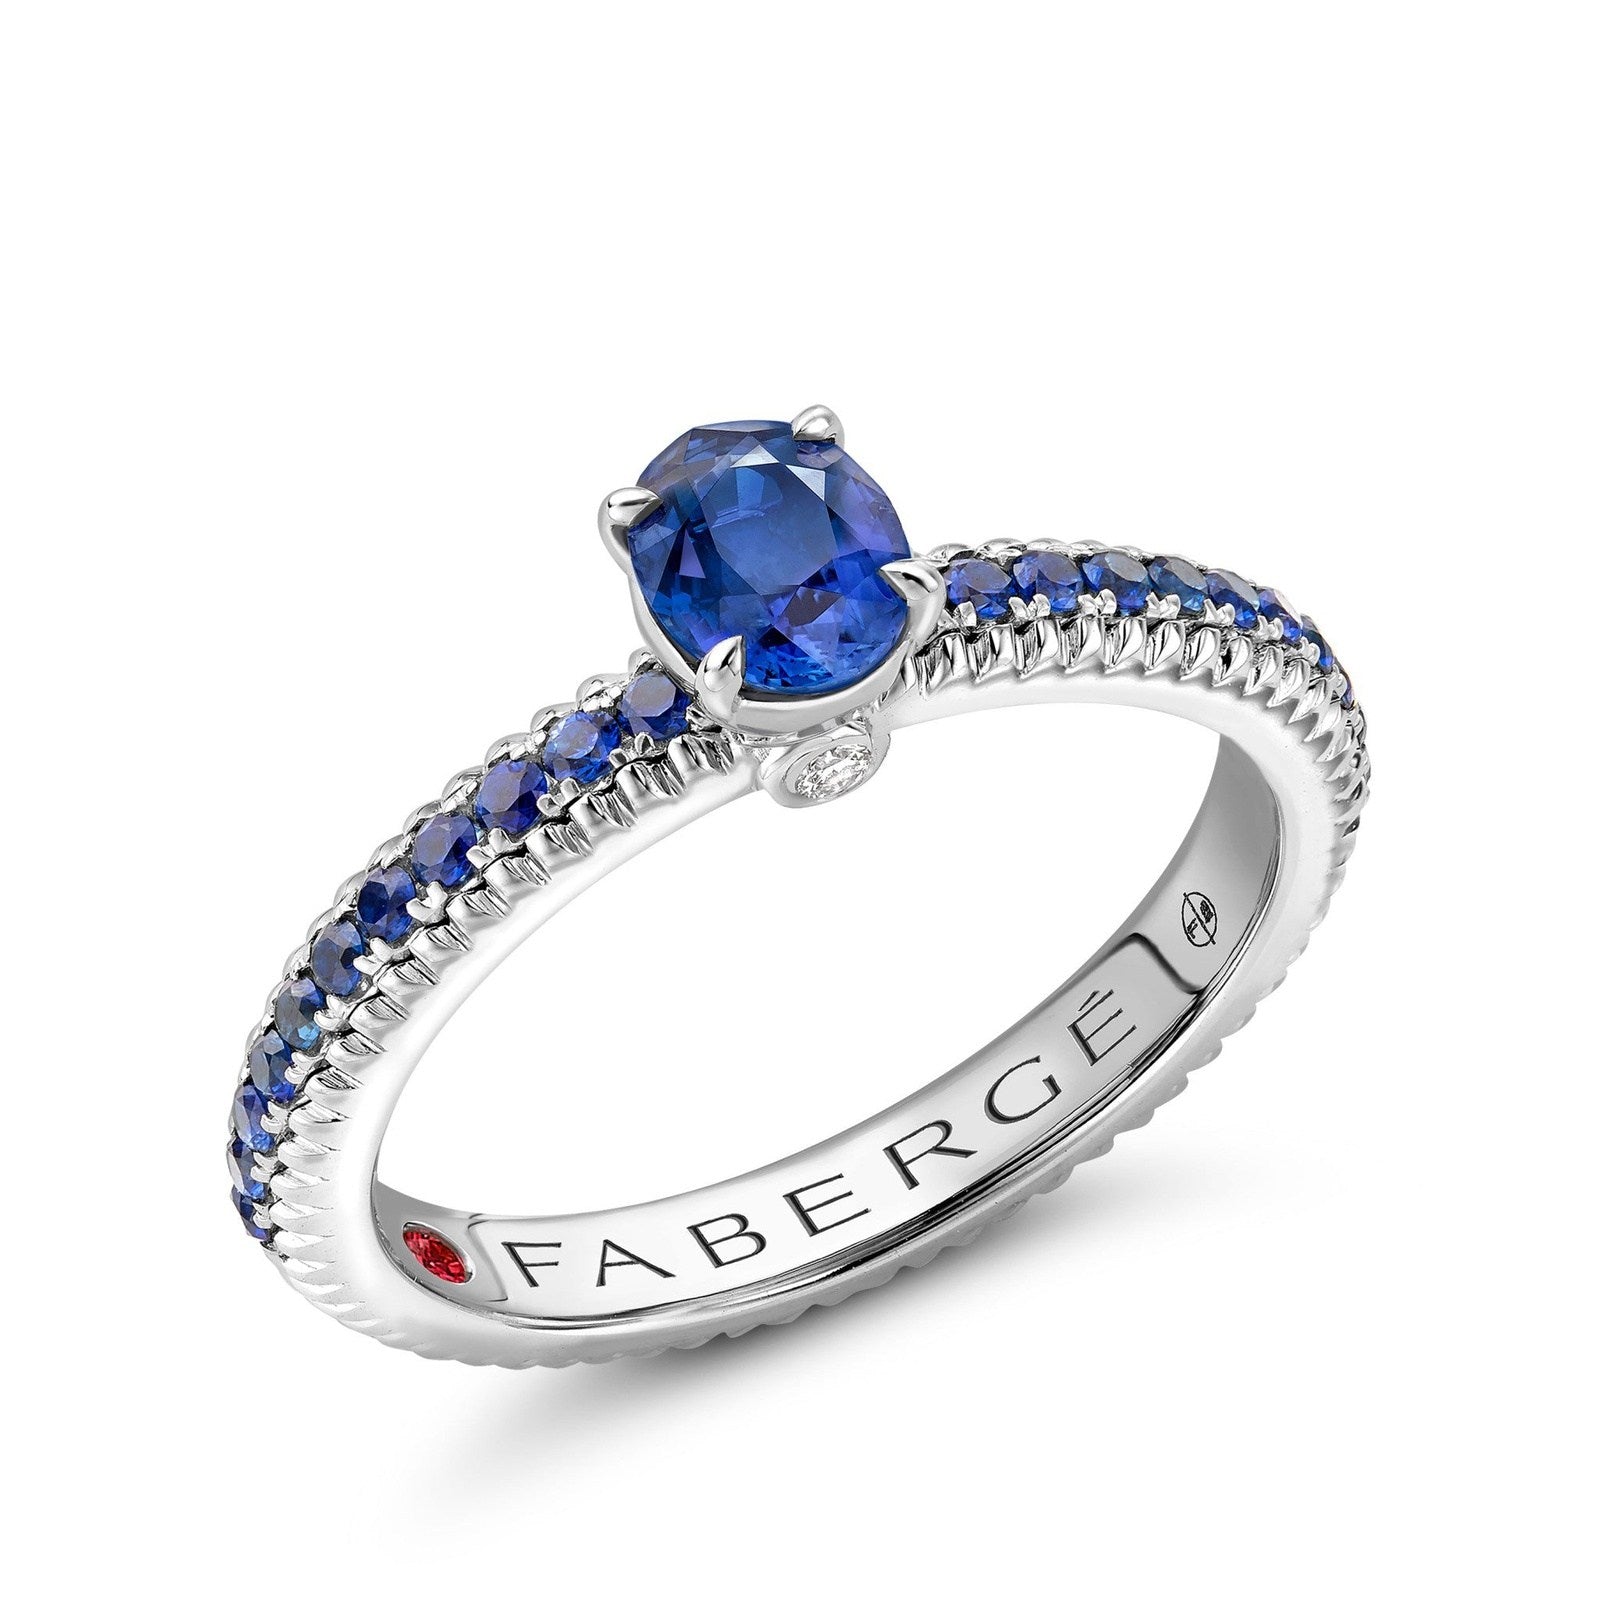 Faberge Colours of Love White Gold Blue Sapphire Fluted Ring with Sapphire Shoulders - 831RG2746